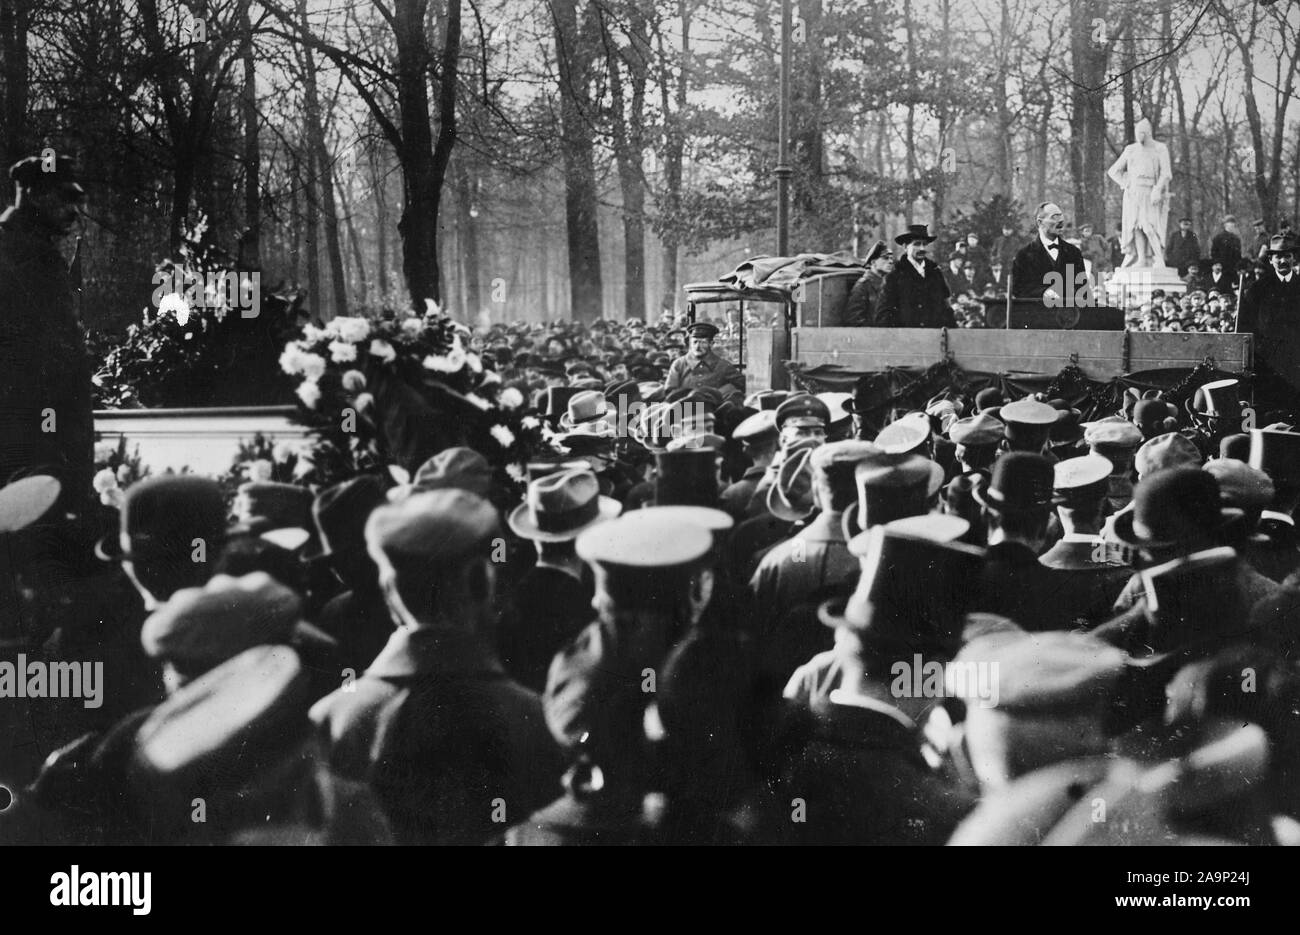 German Revolution - The last public appearance of Liebnecht, on Sieges Allee. After this inciting meeting he was arrested by Ebert Government troops, Berlin, Germany (possibly January 1919) Stock Photo